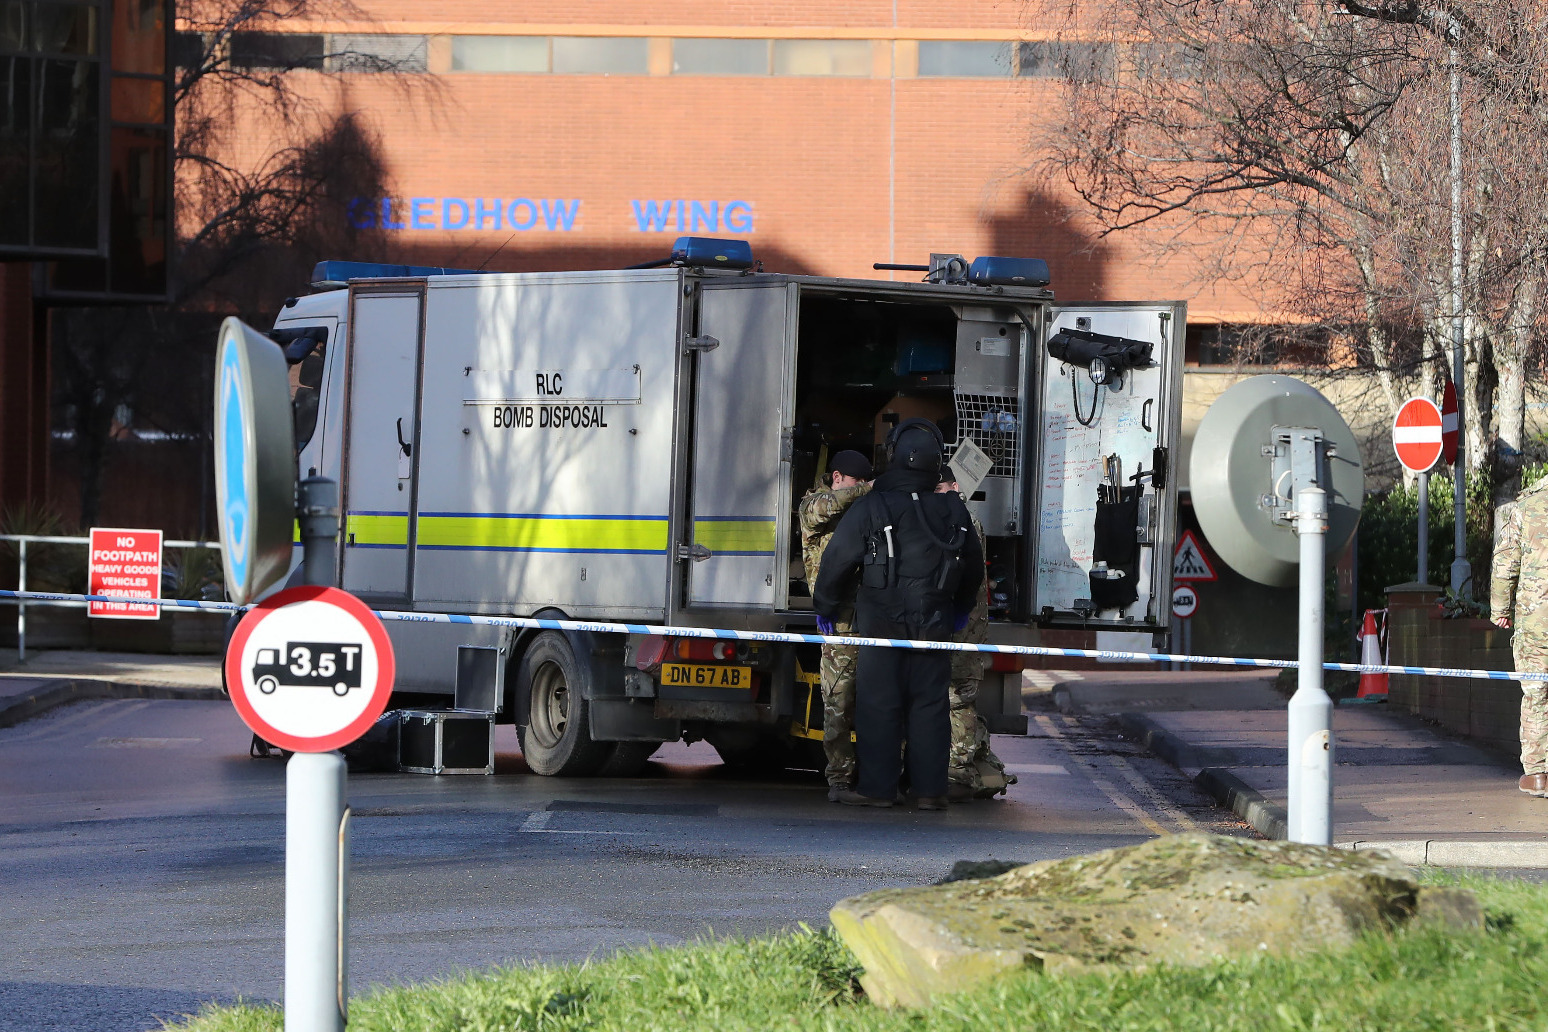 Counter-terror arrest after suspicious package sparks maternity ward evacuation 